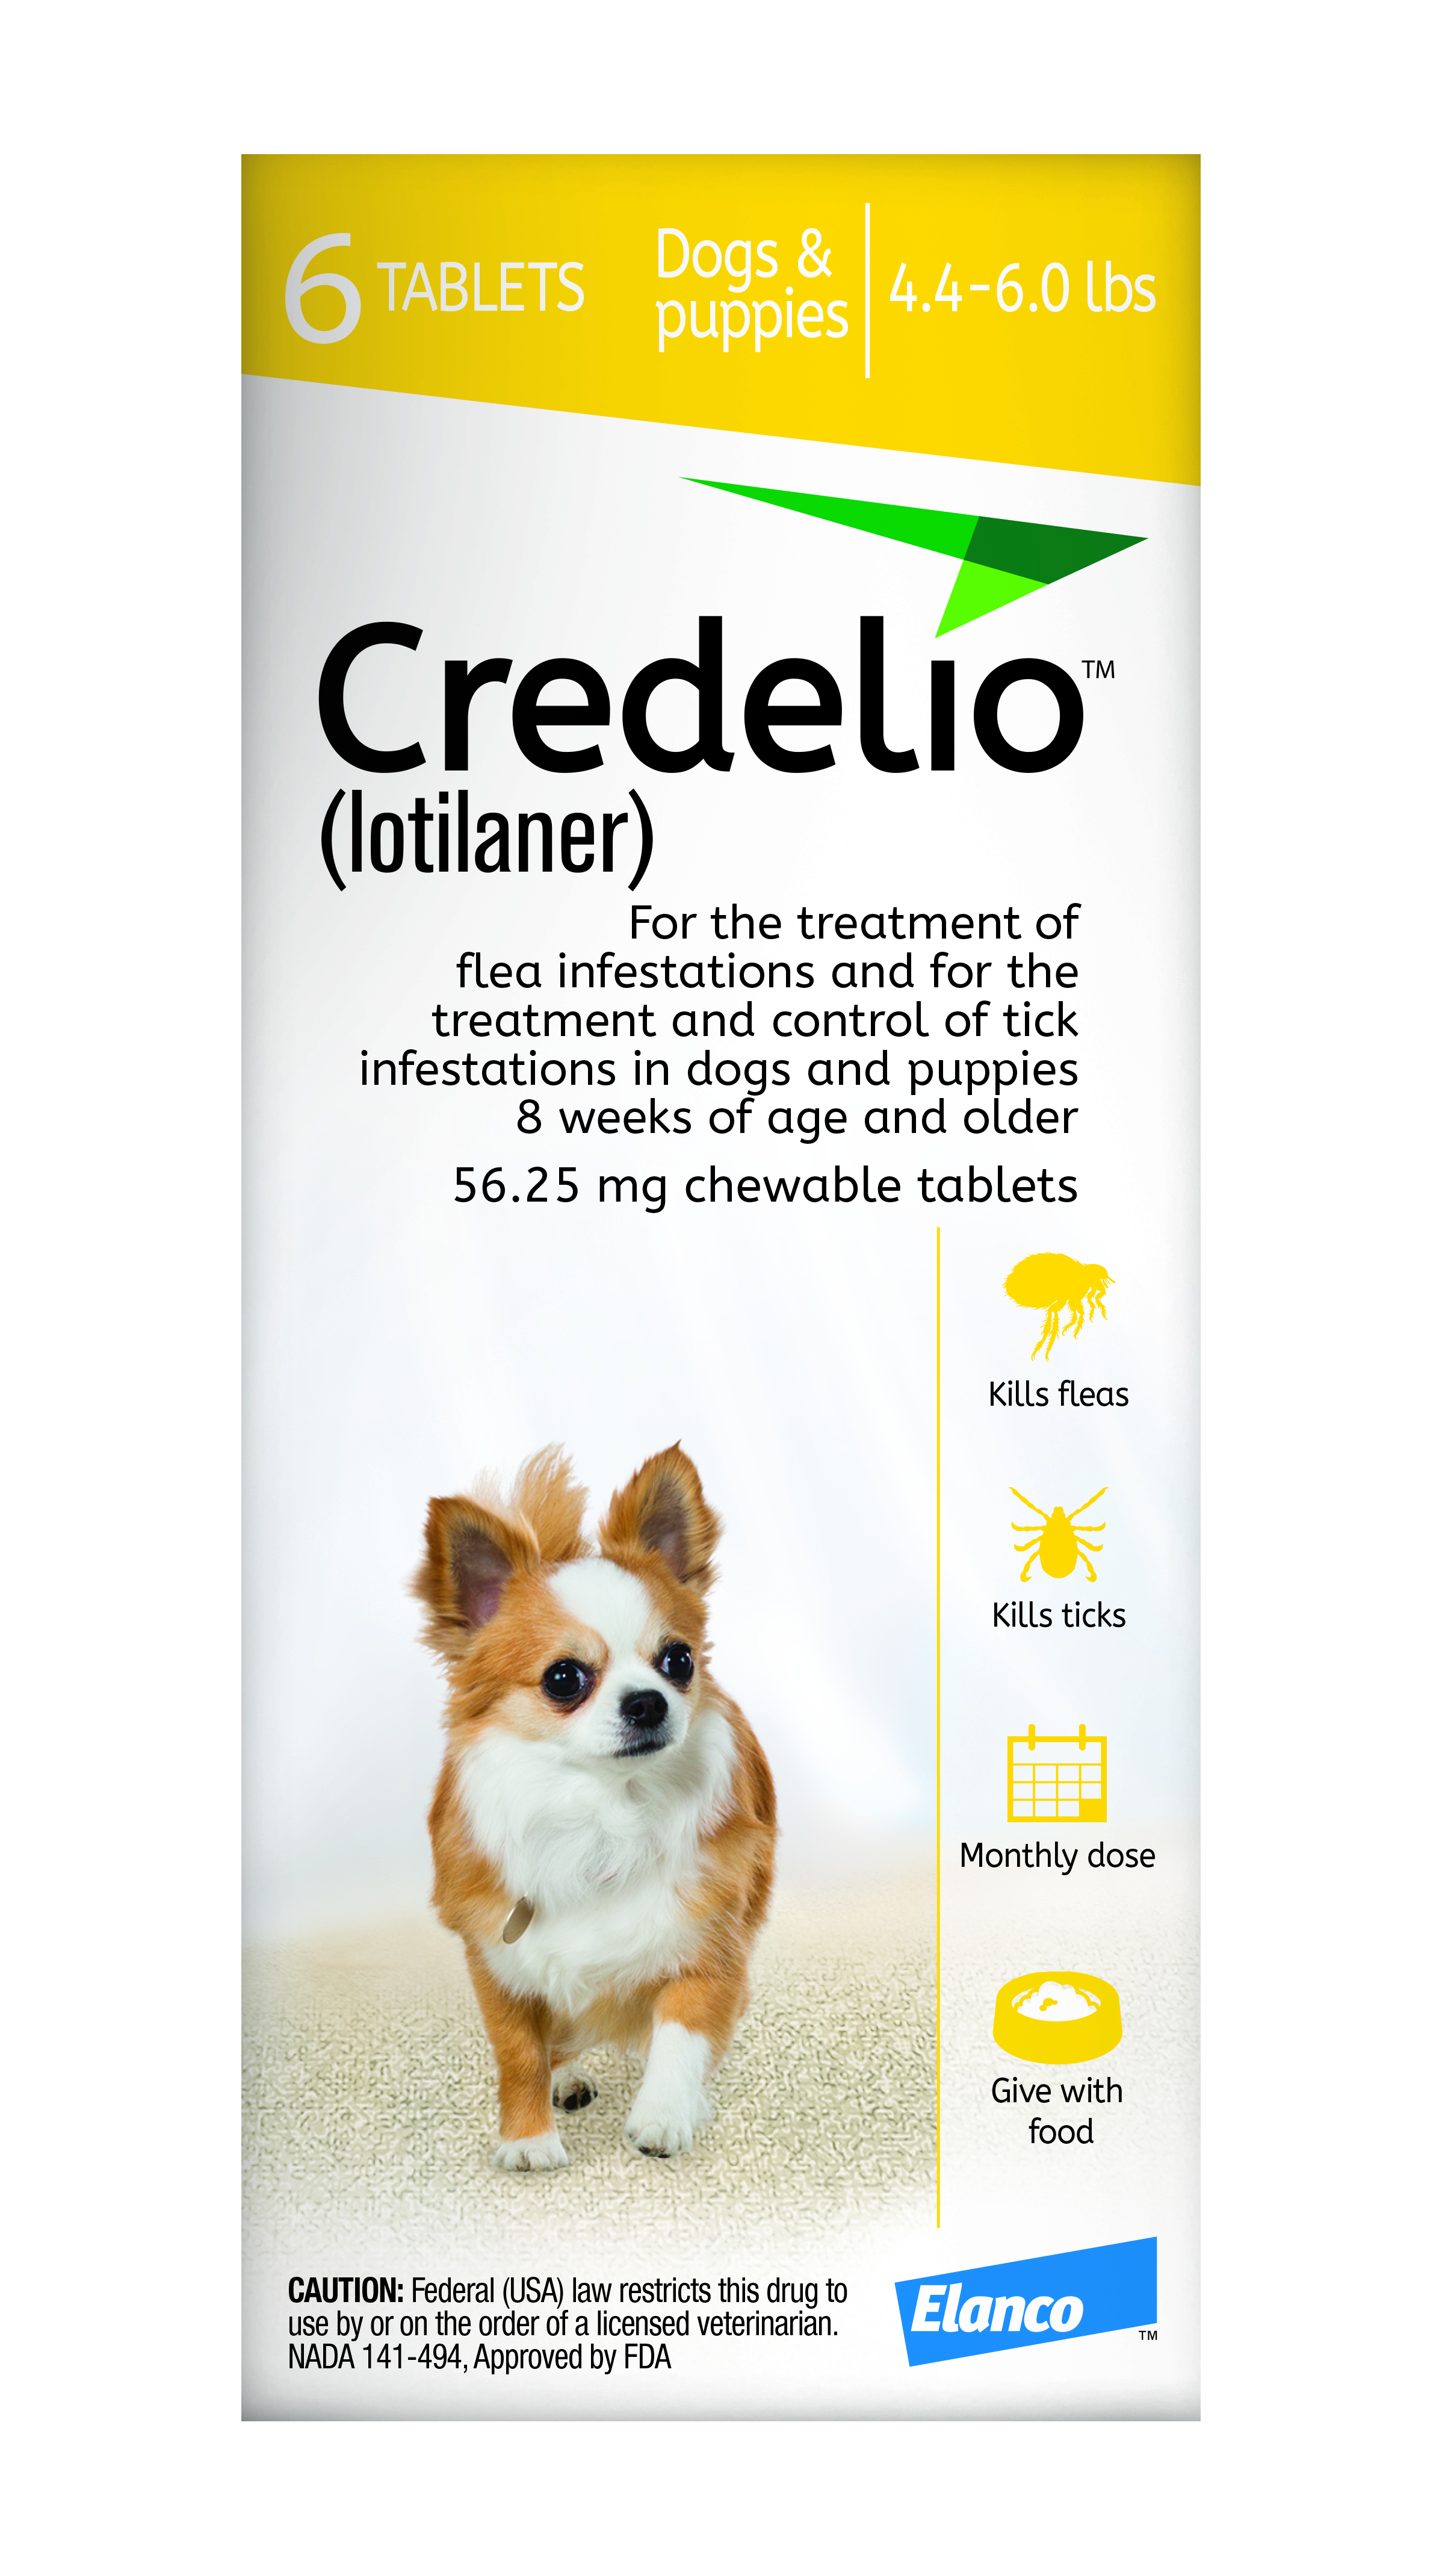 credelio-chewable-for-dogs-4-4-6-lbs-6-tablets